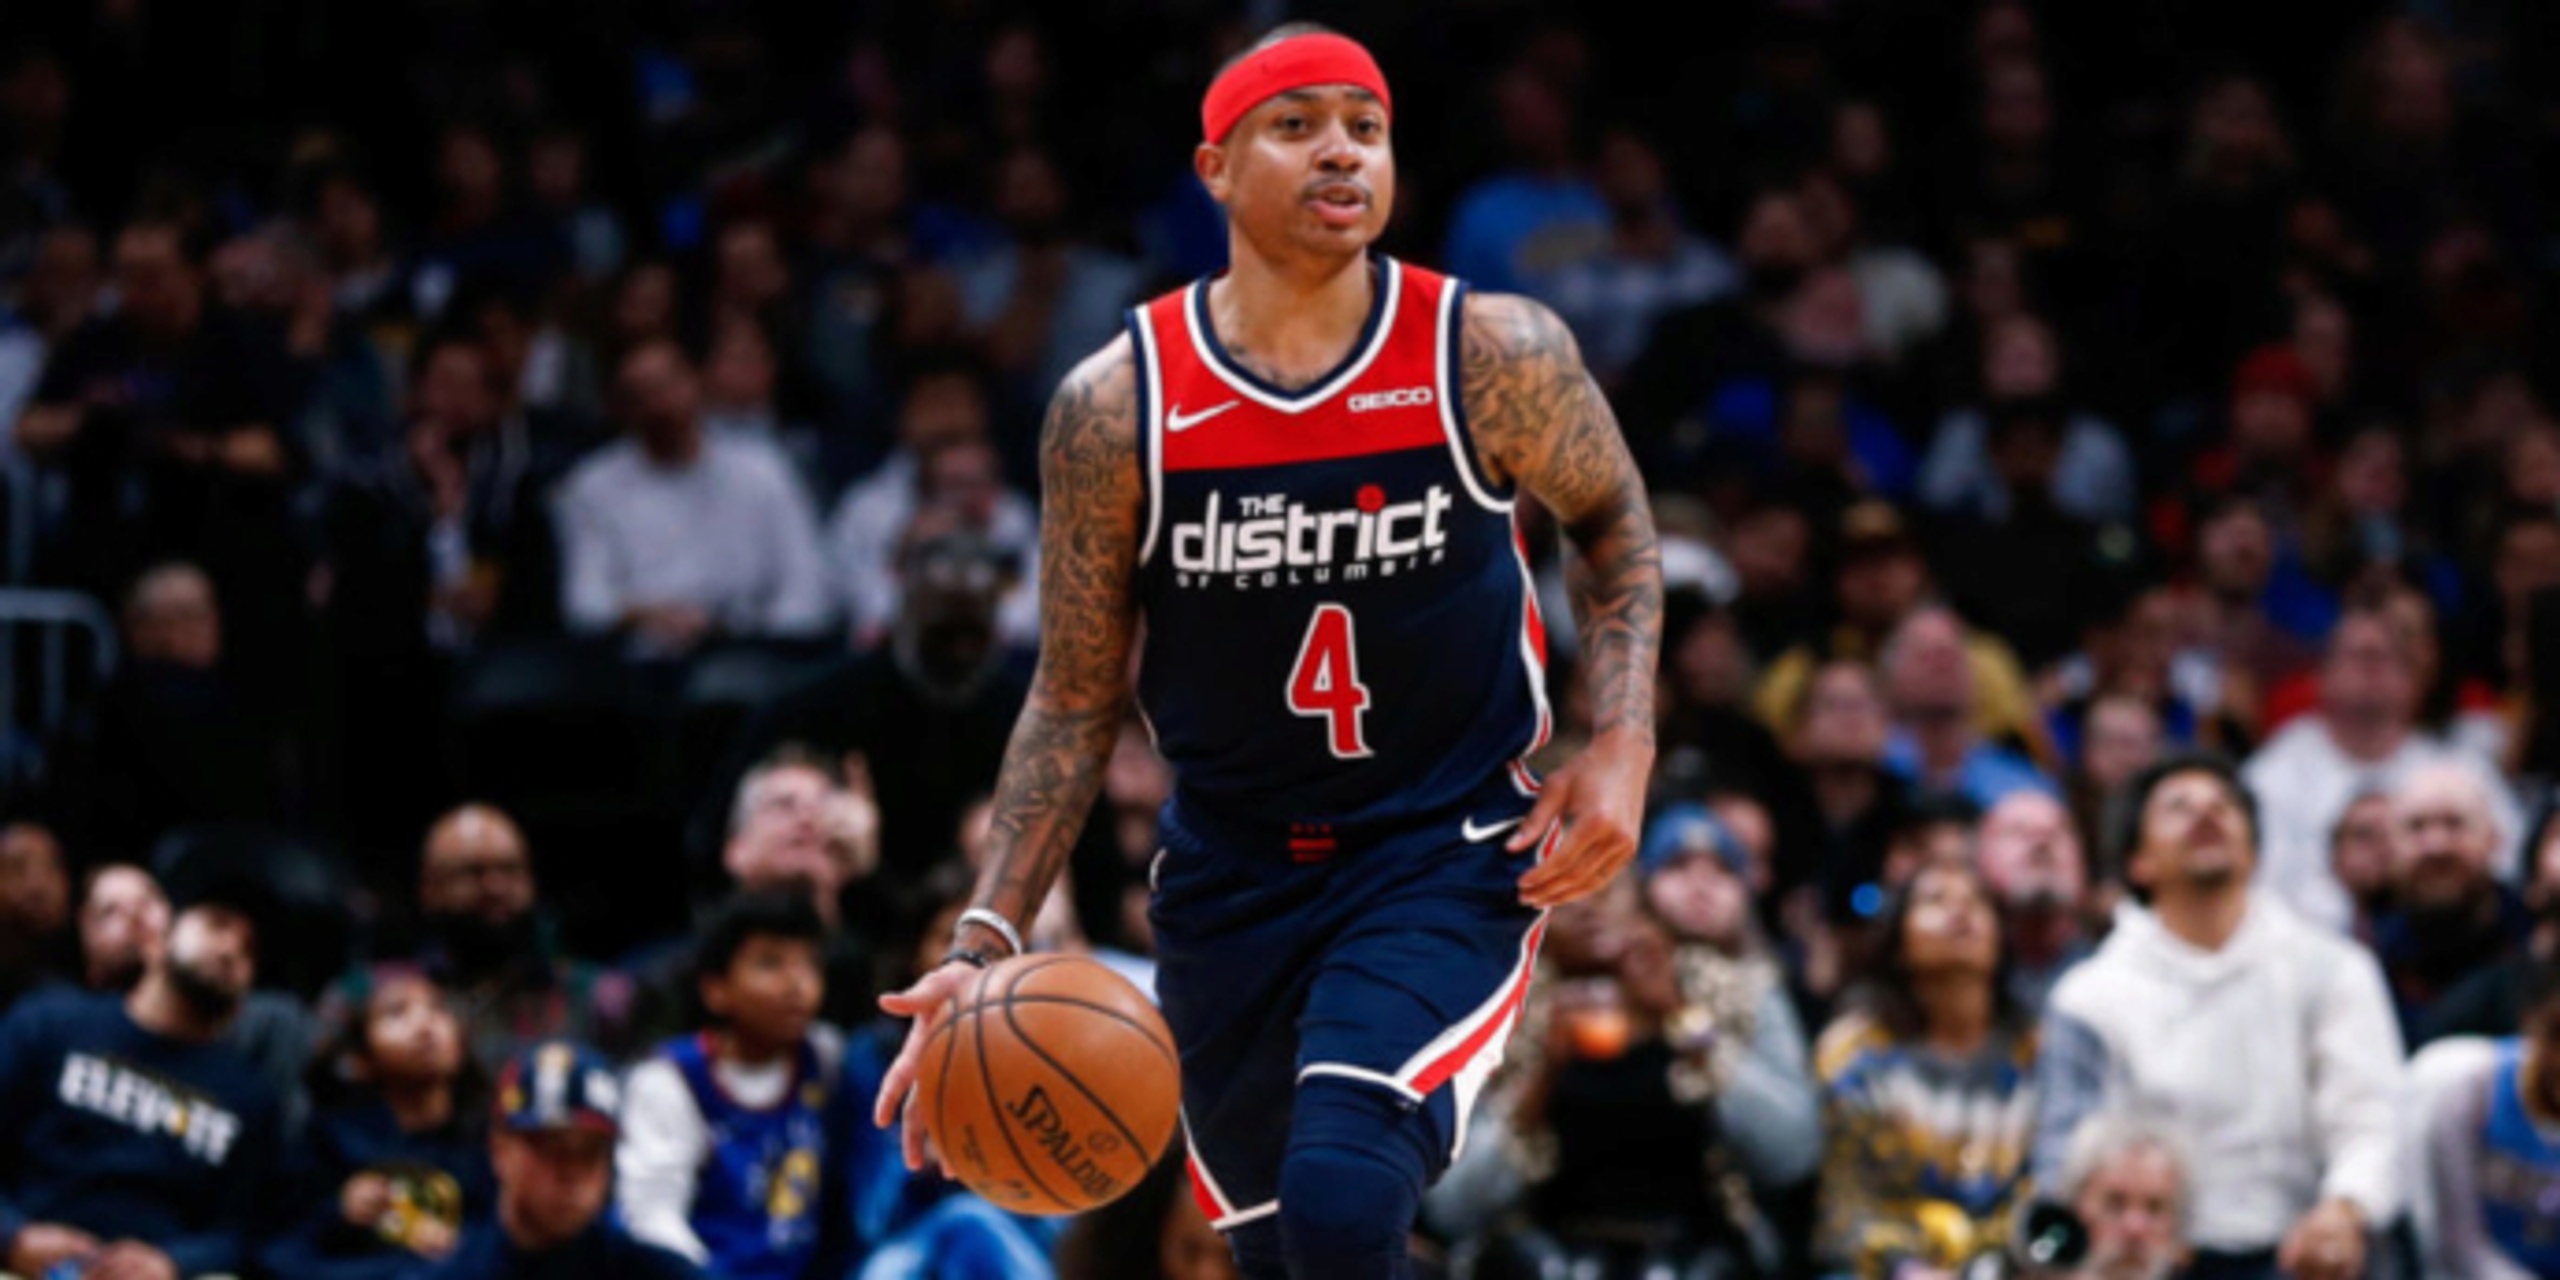 Isaiah Thomas ready to help Pelicans: 'I still have a lot of basketball left in me'